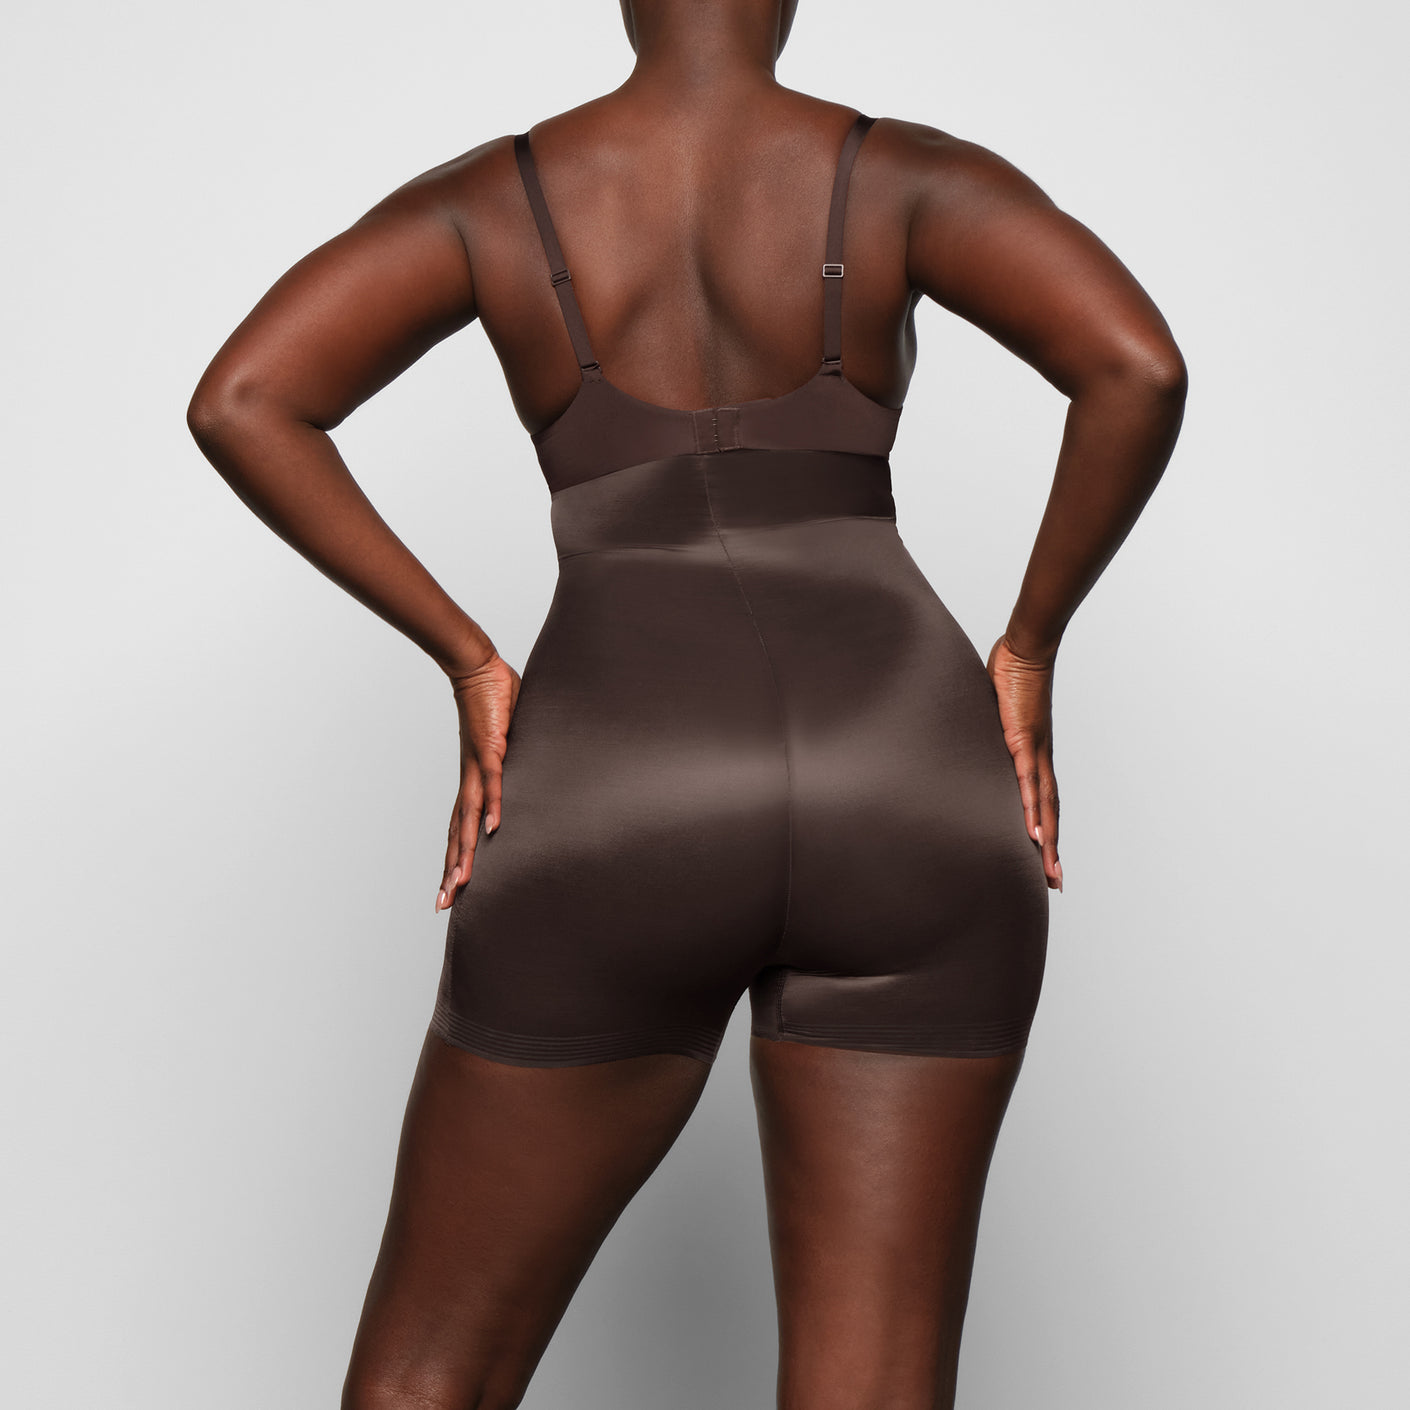 SKIMS NEW BARELY THERE SHAPEWEAR COLLECTION REVIEW